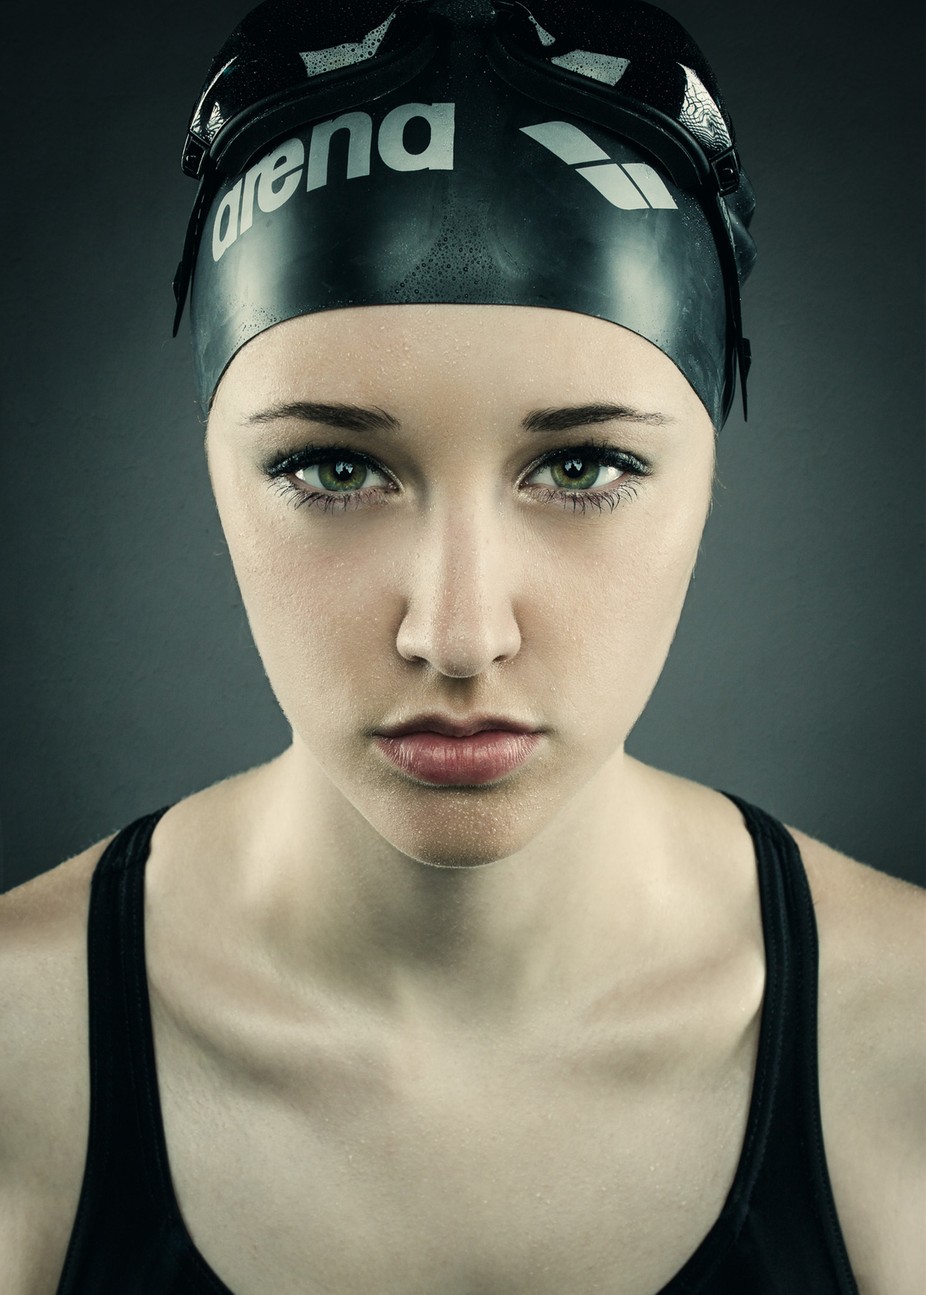 Swimmer by MichaelSchnabl - Image Of The Month Photo Contest Vol 39